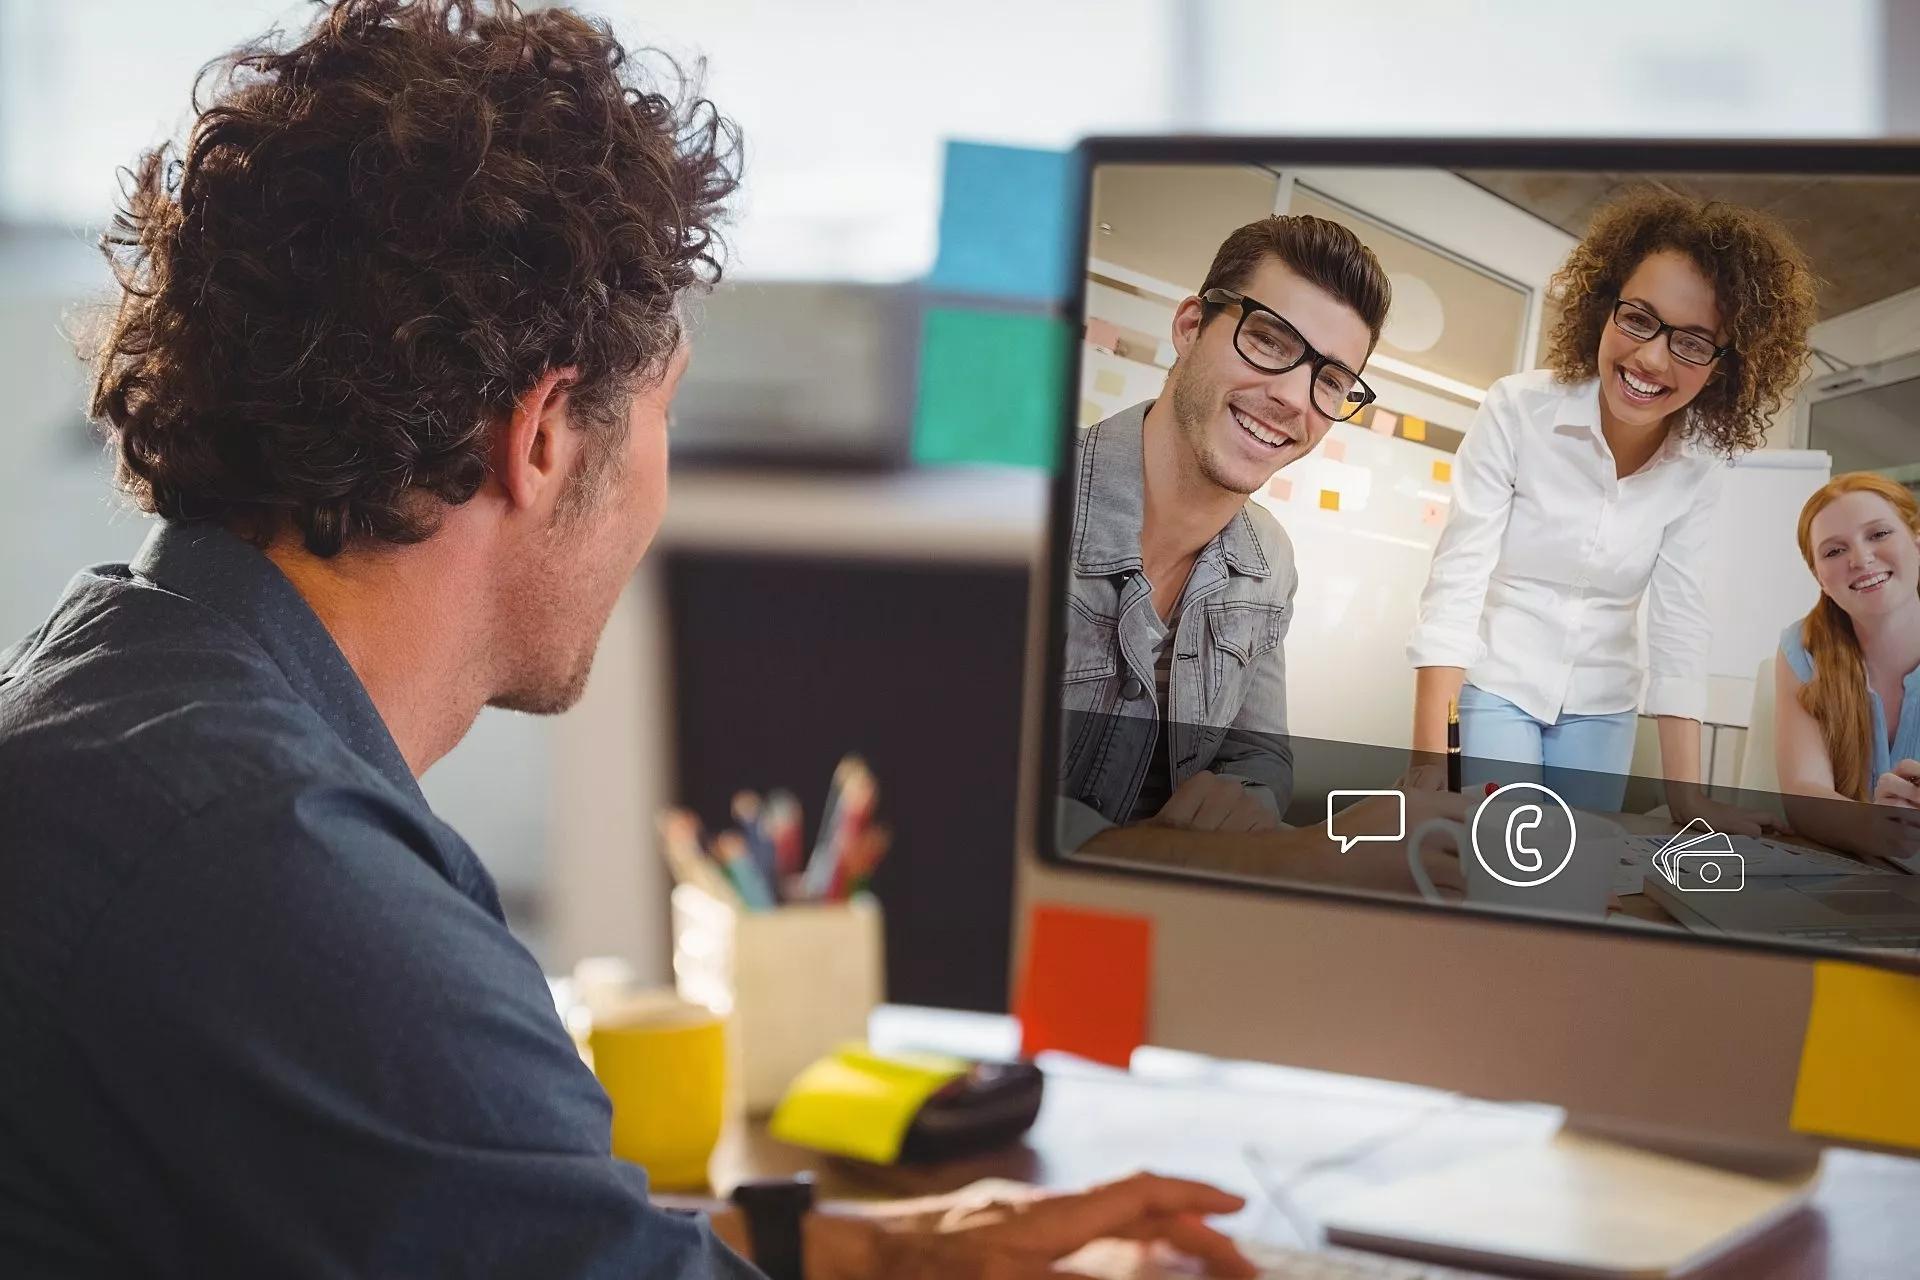 A remote employee interacts with team members through videoconferencing technology.